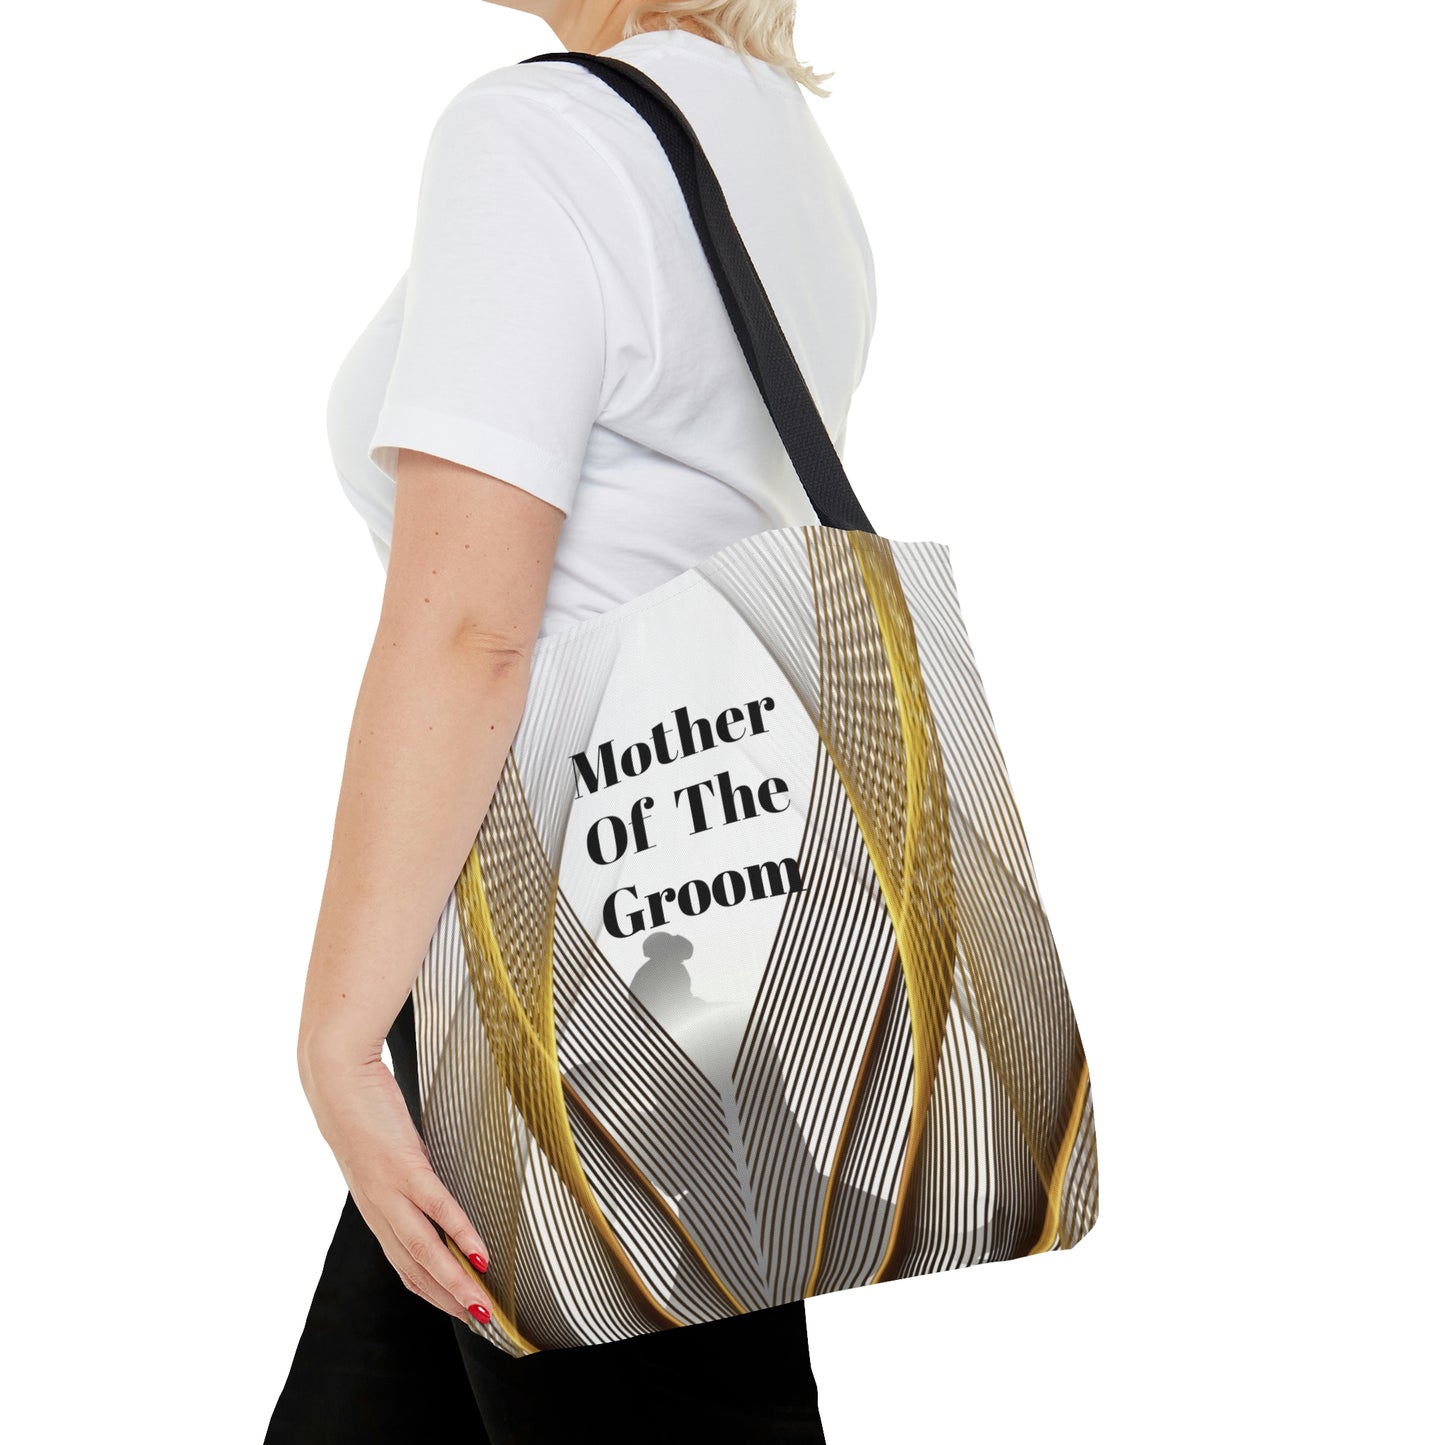 Mother Of The Groom Gift Bag | White Tote | Practical Wedding Gift | Bridal Shower Gifts